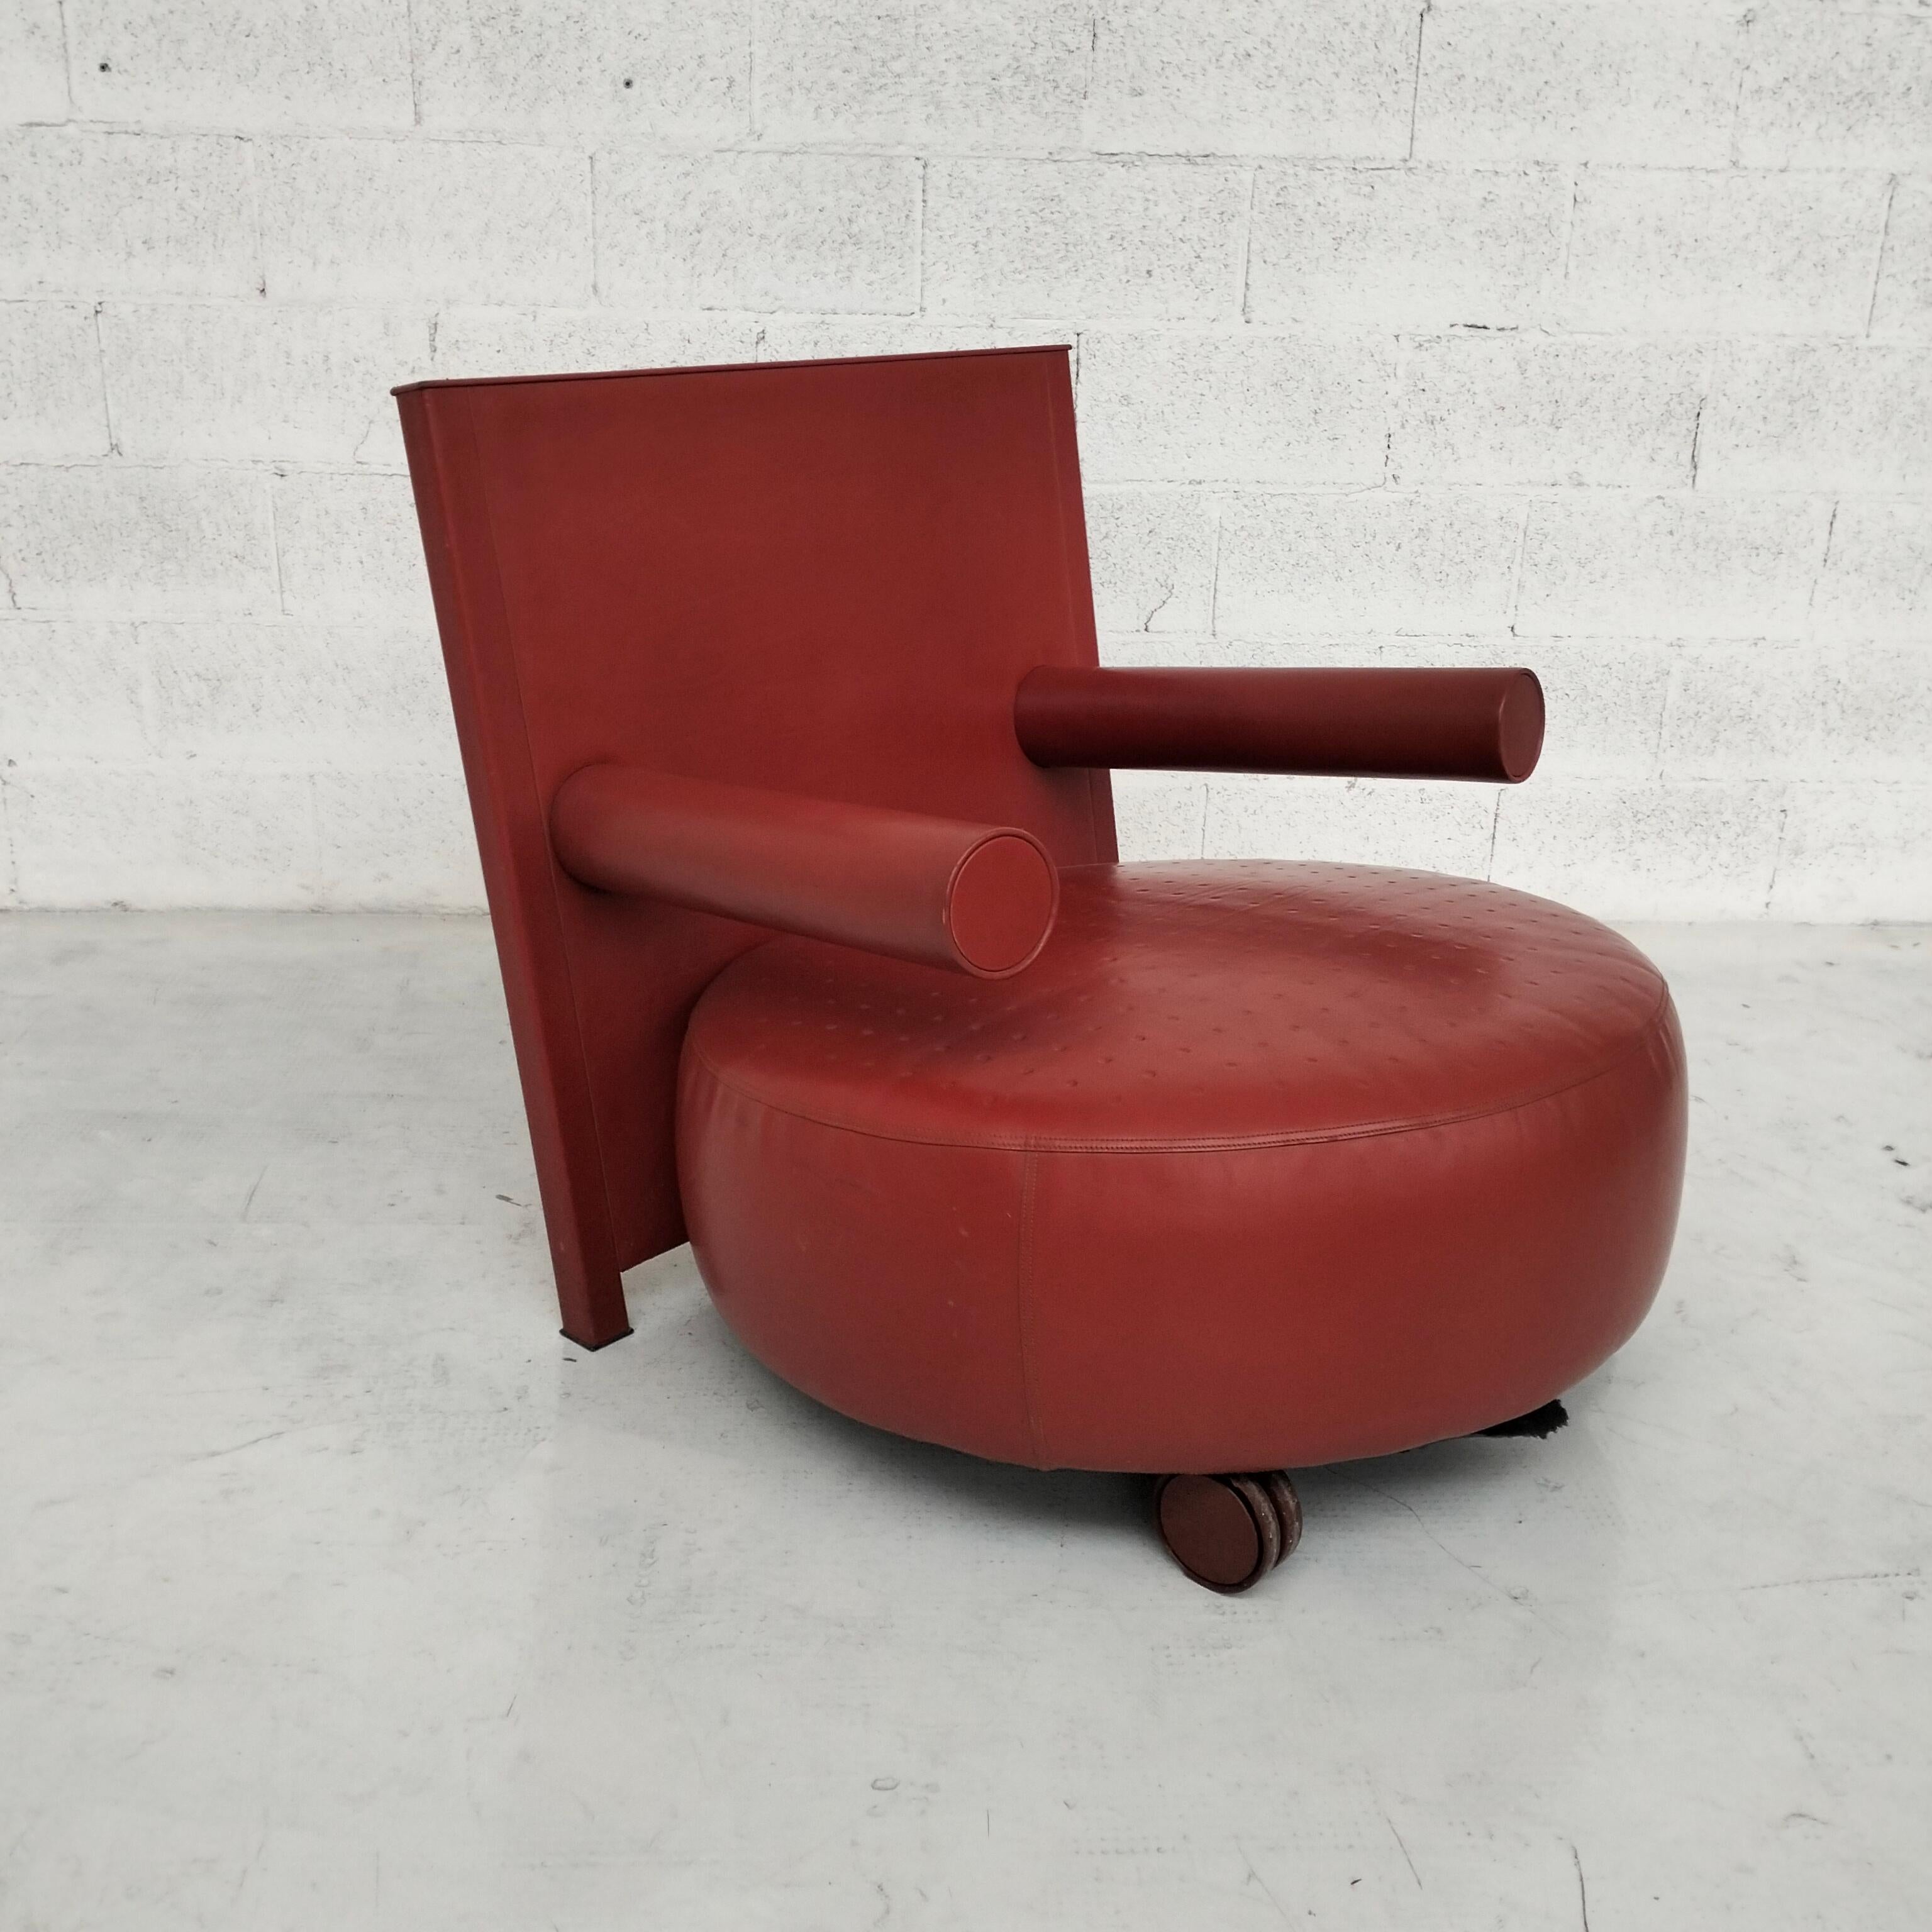 Baisity leather armchair by Antonio Citterio for B&B Italia - 1980’s For Sale 1